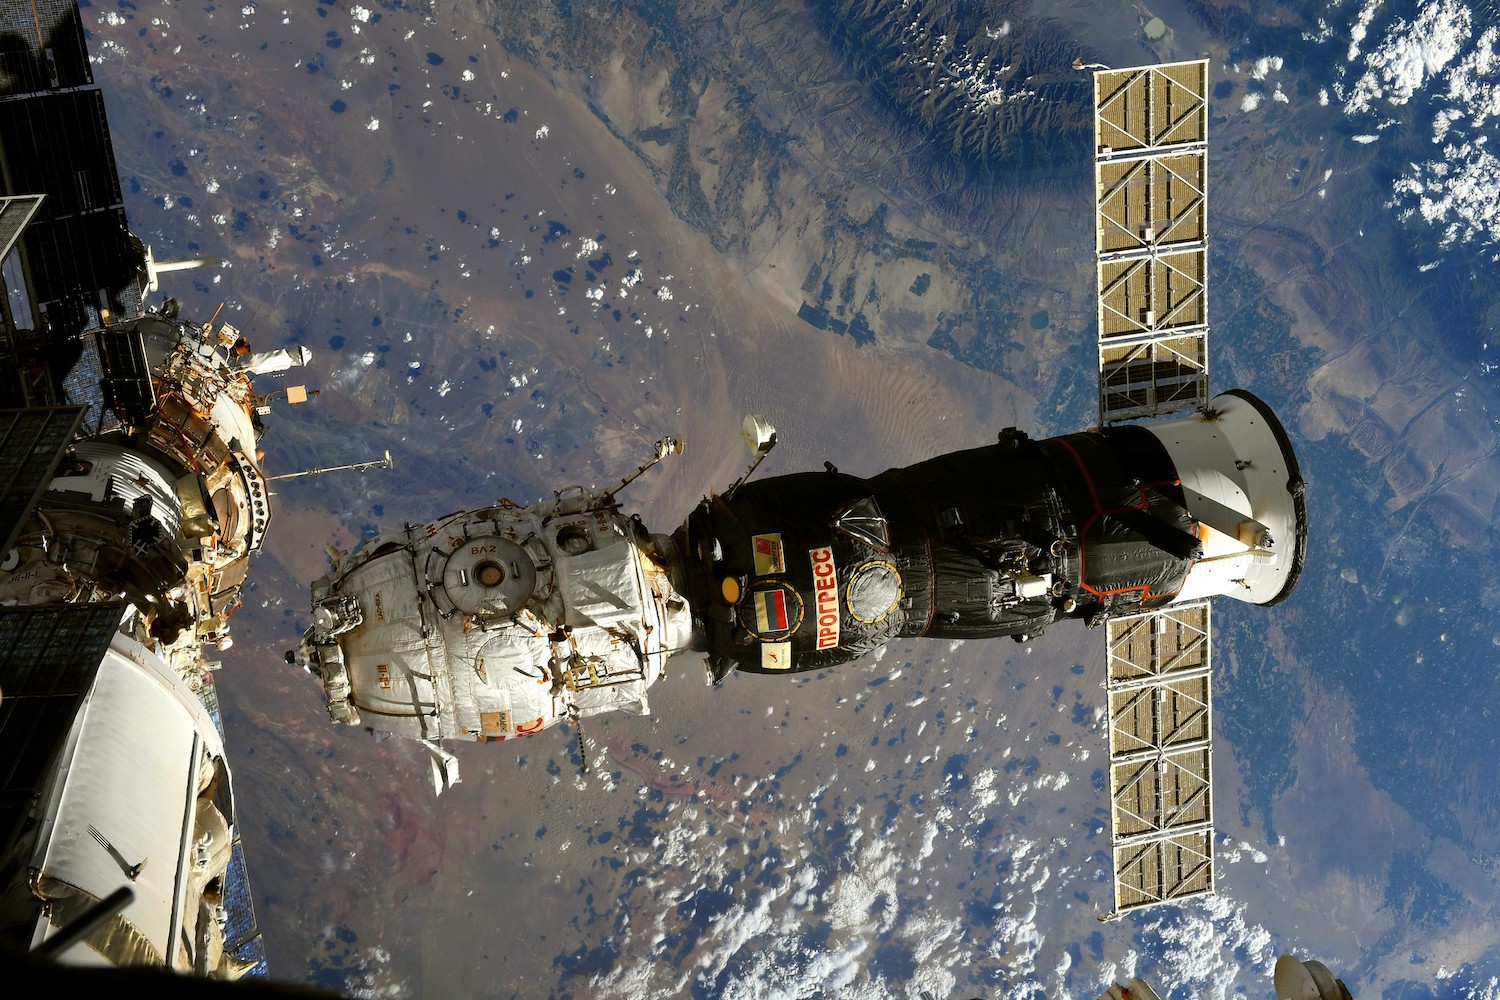 Russia's Pirs module departing the International Space Station after 20 years.